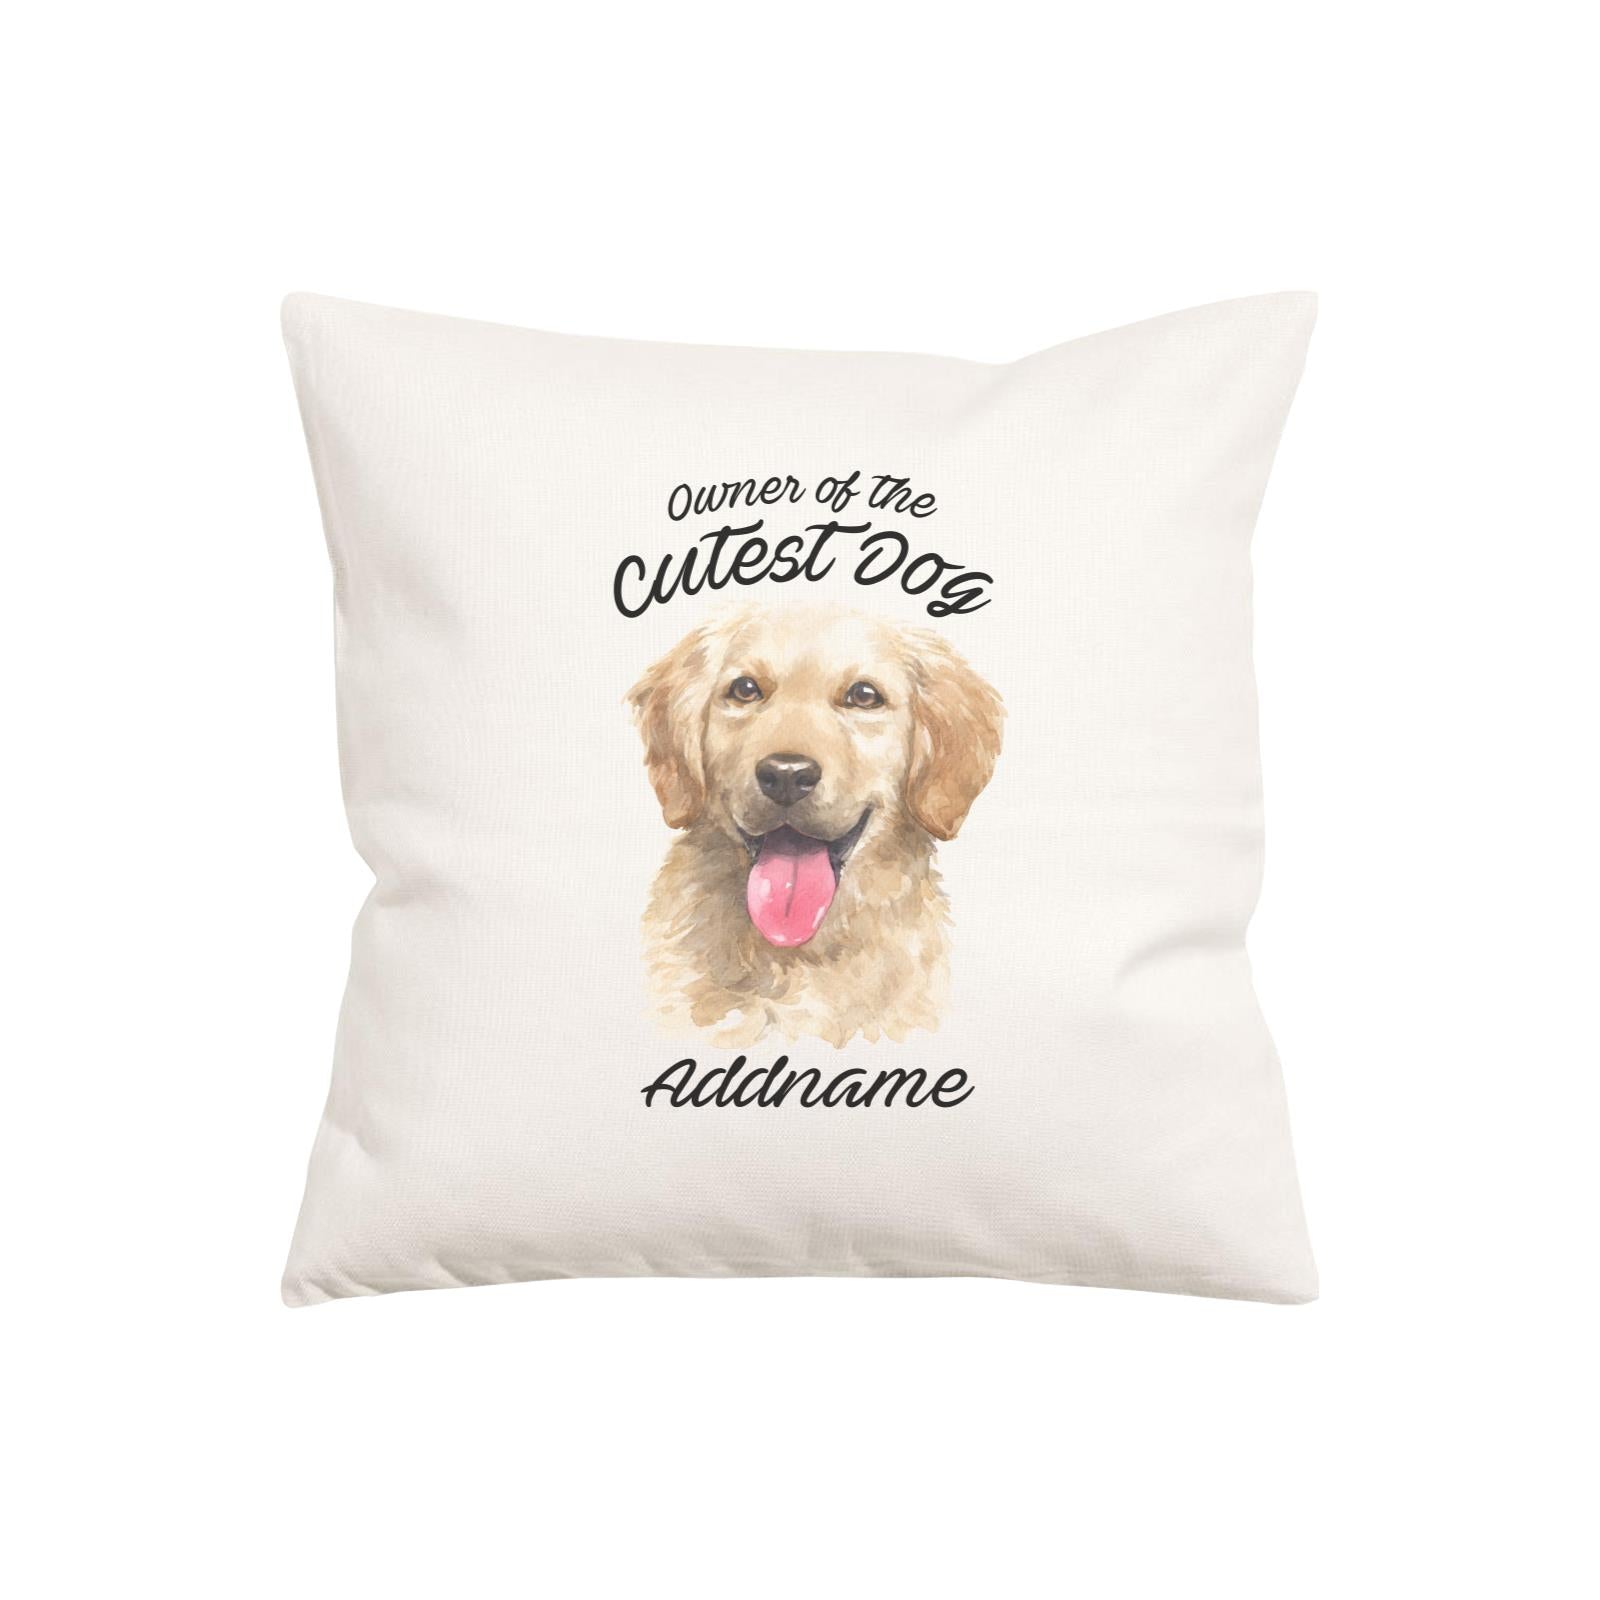 Watercolor Dog Owner Of The Cutest Dog Golden Retriever Front Addname Pillow Cushion